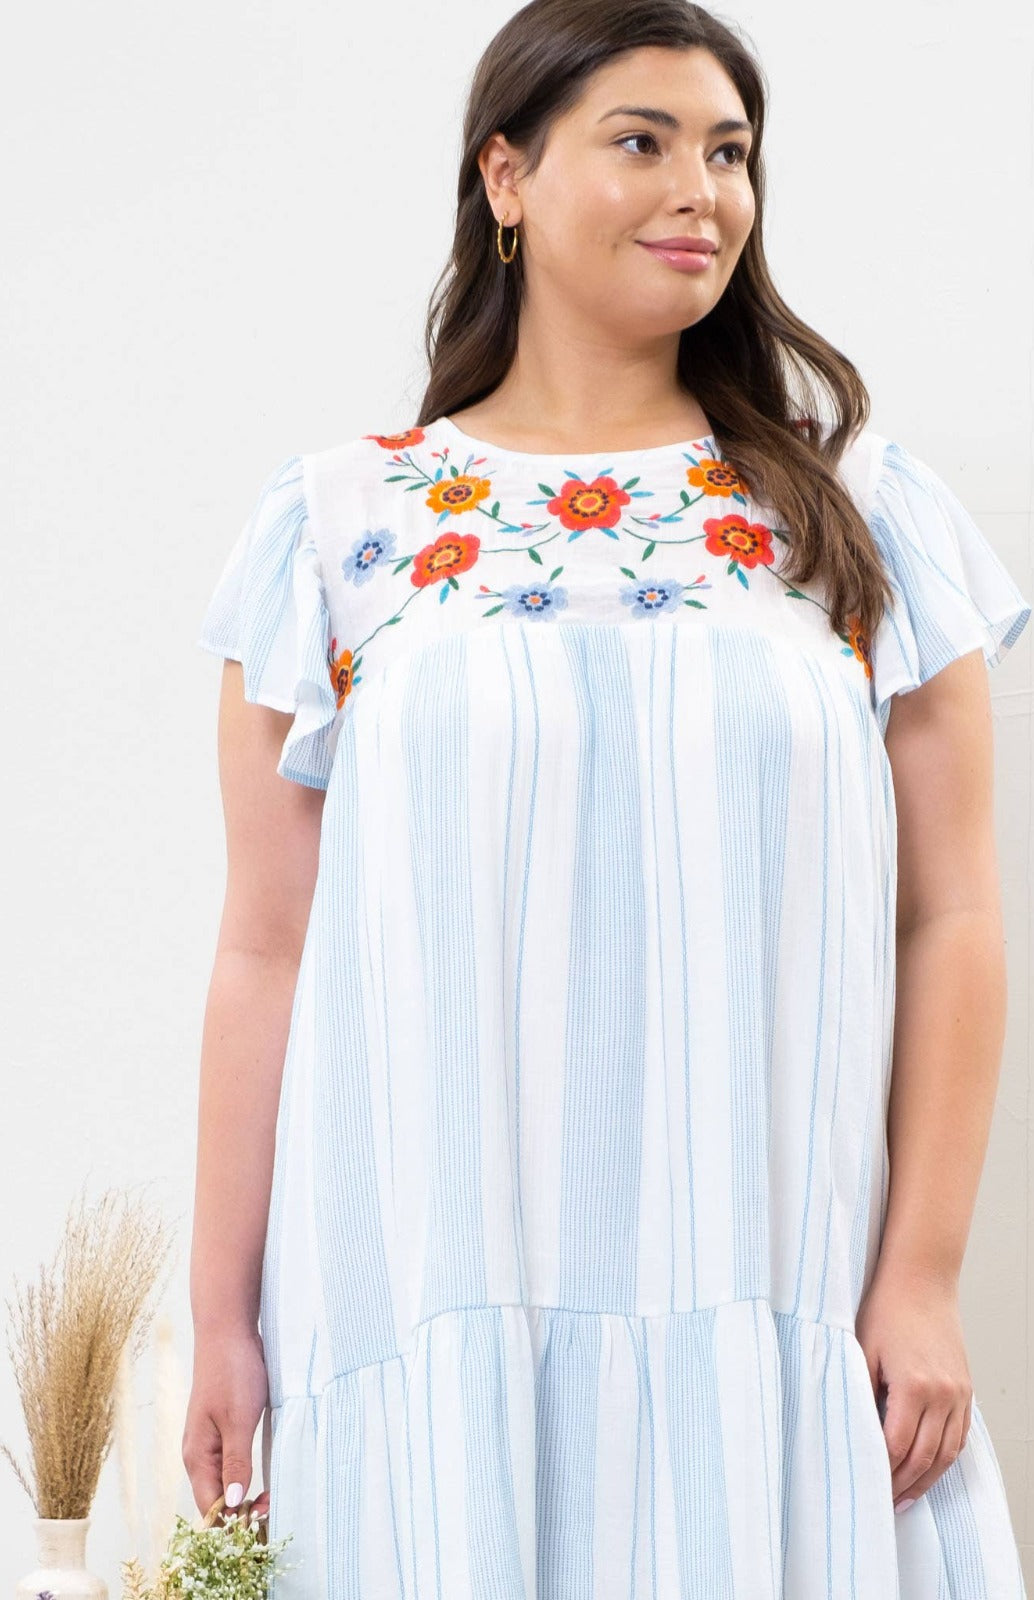 Plus Size Striped Dress with Floral Embroidery in Blue, White and Red Cute Hues